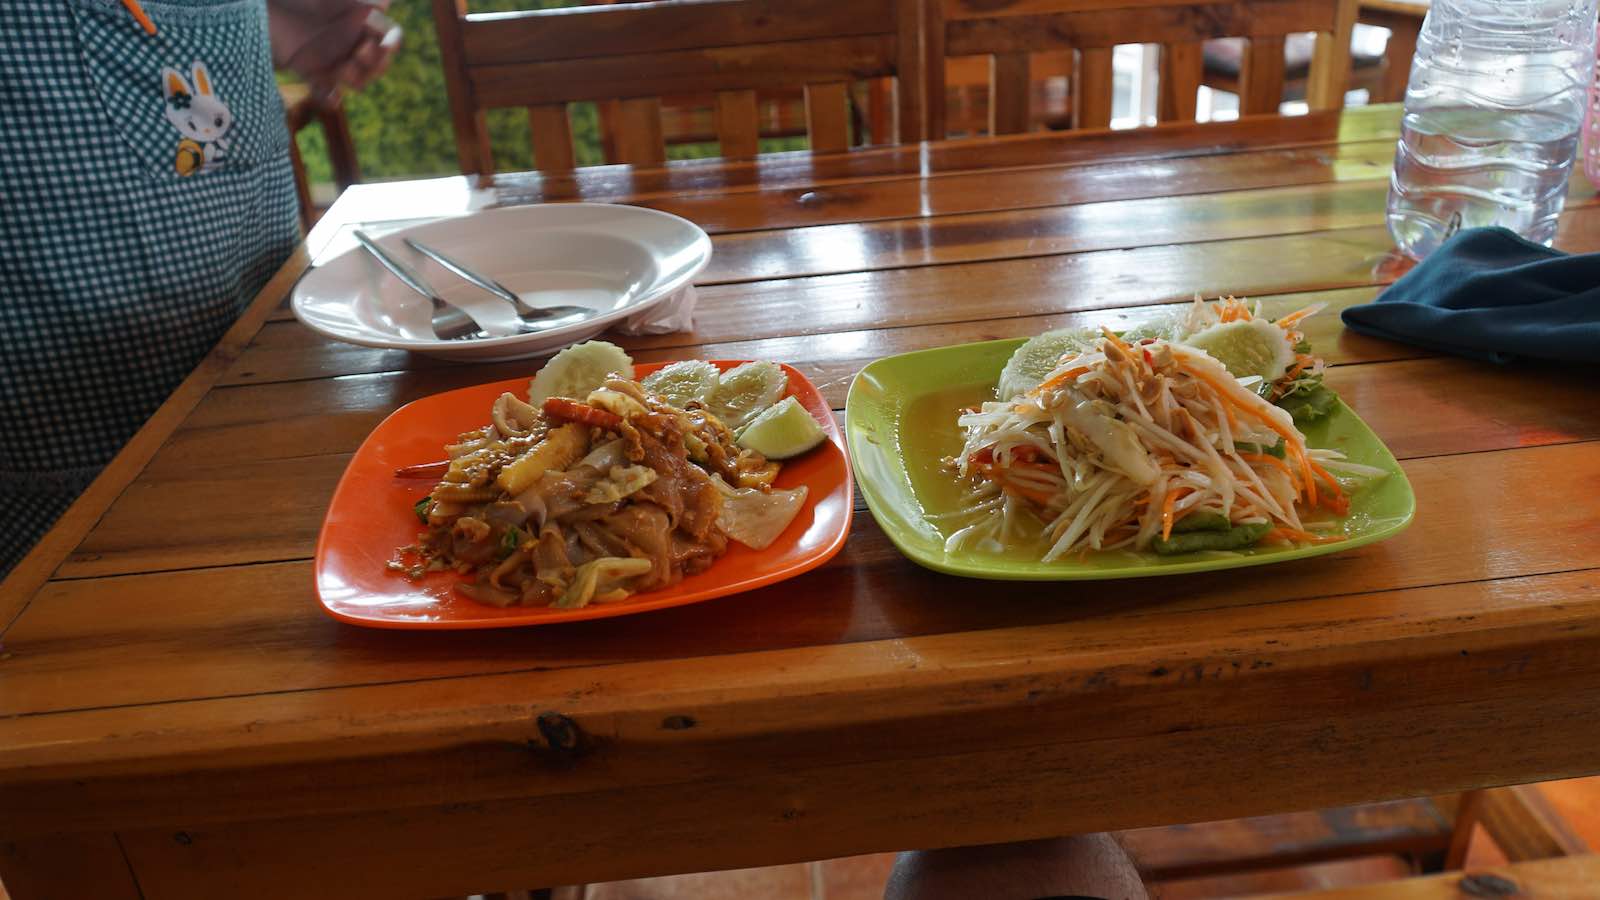 Aside from the beach I spent most of my time in Krabi resting in my hostel and eating pad thais, papaya salads, and mango sticky rice.